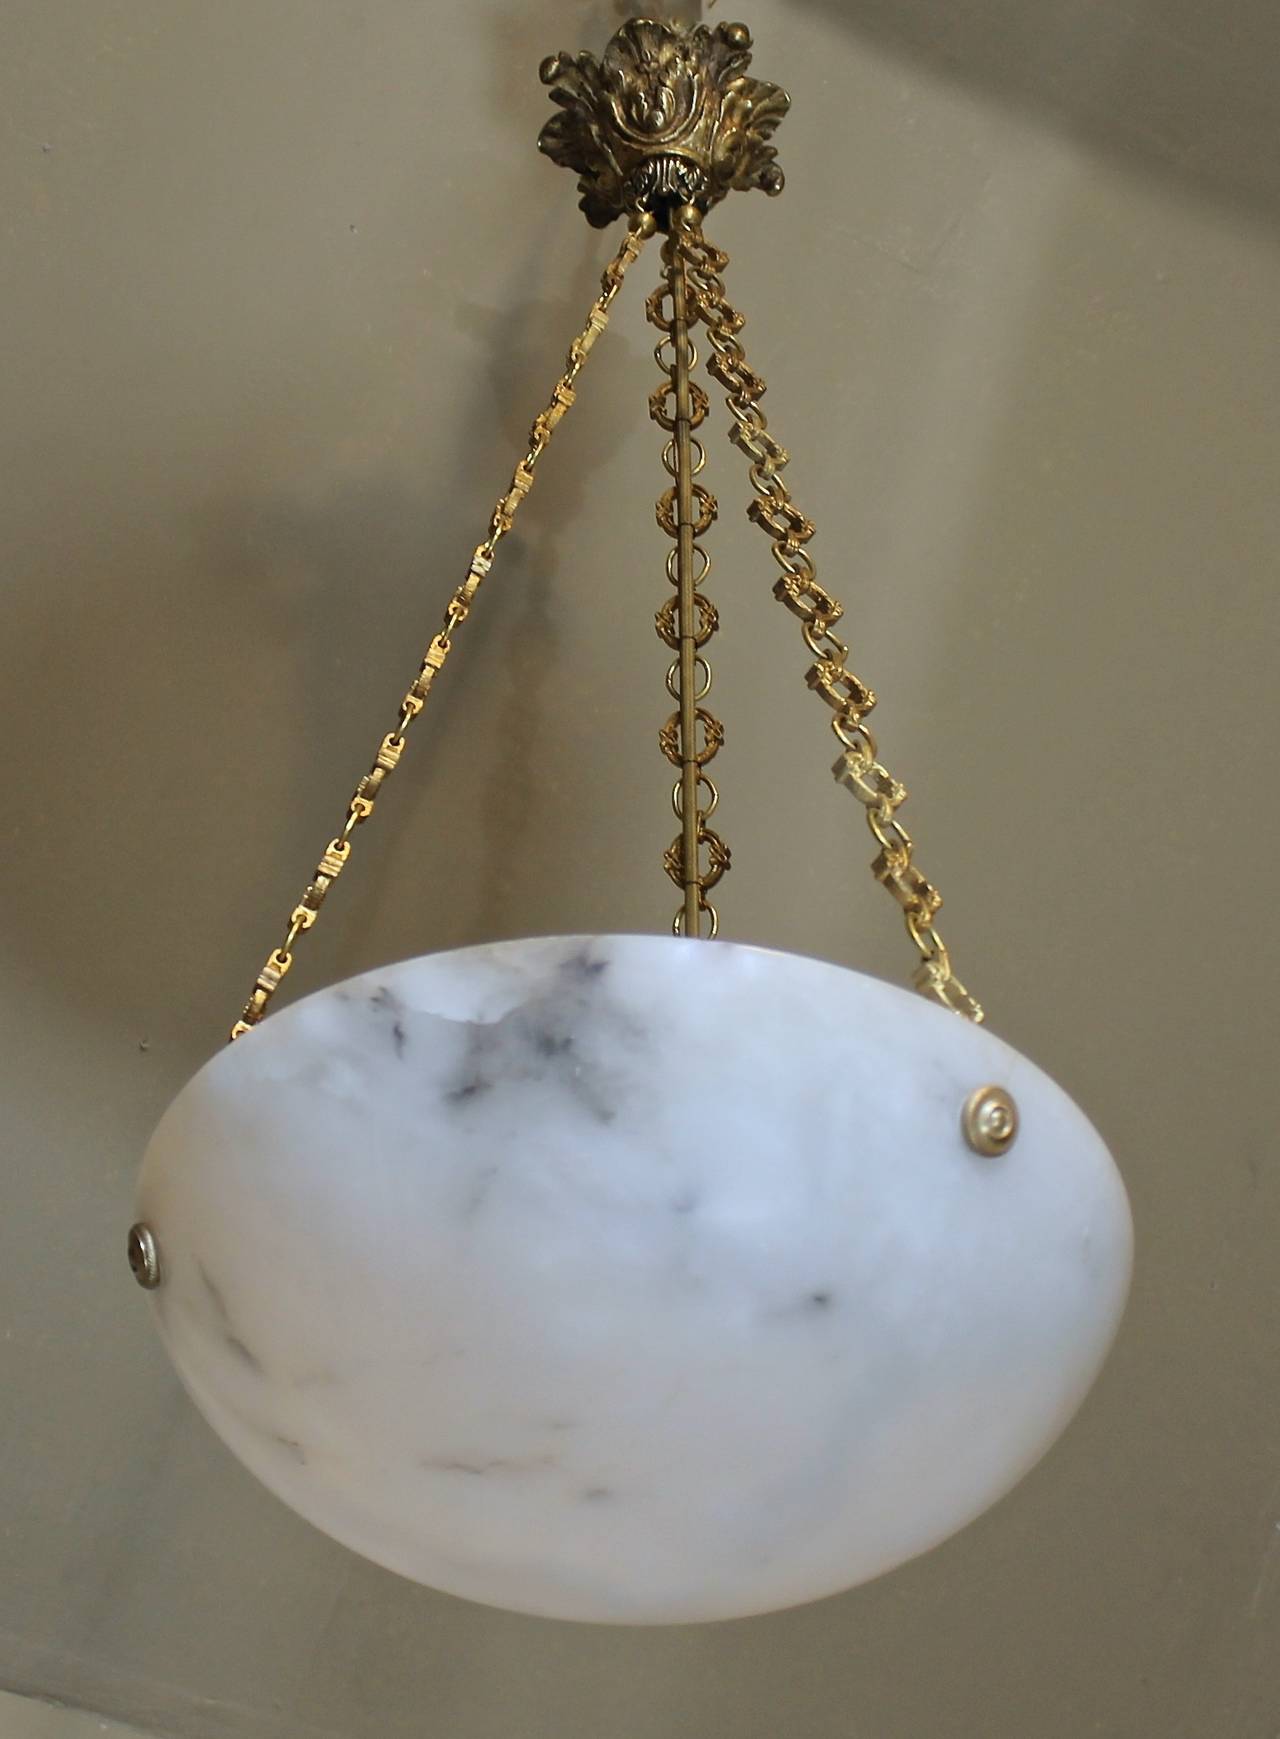 French alabaster pendant light fixture with nicely detailed brass fittings and subtle veining. Newly wired. Uses 1 - 60 watt max 